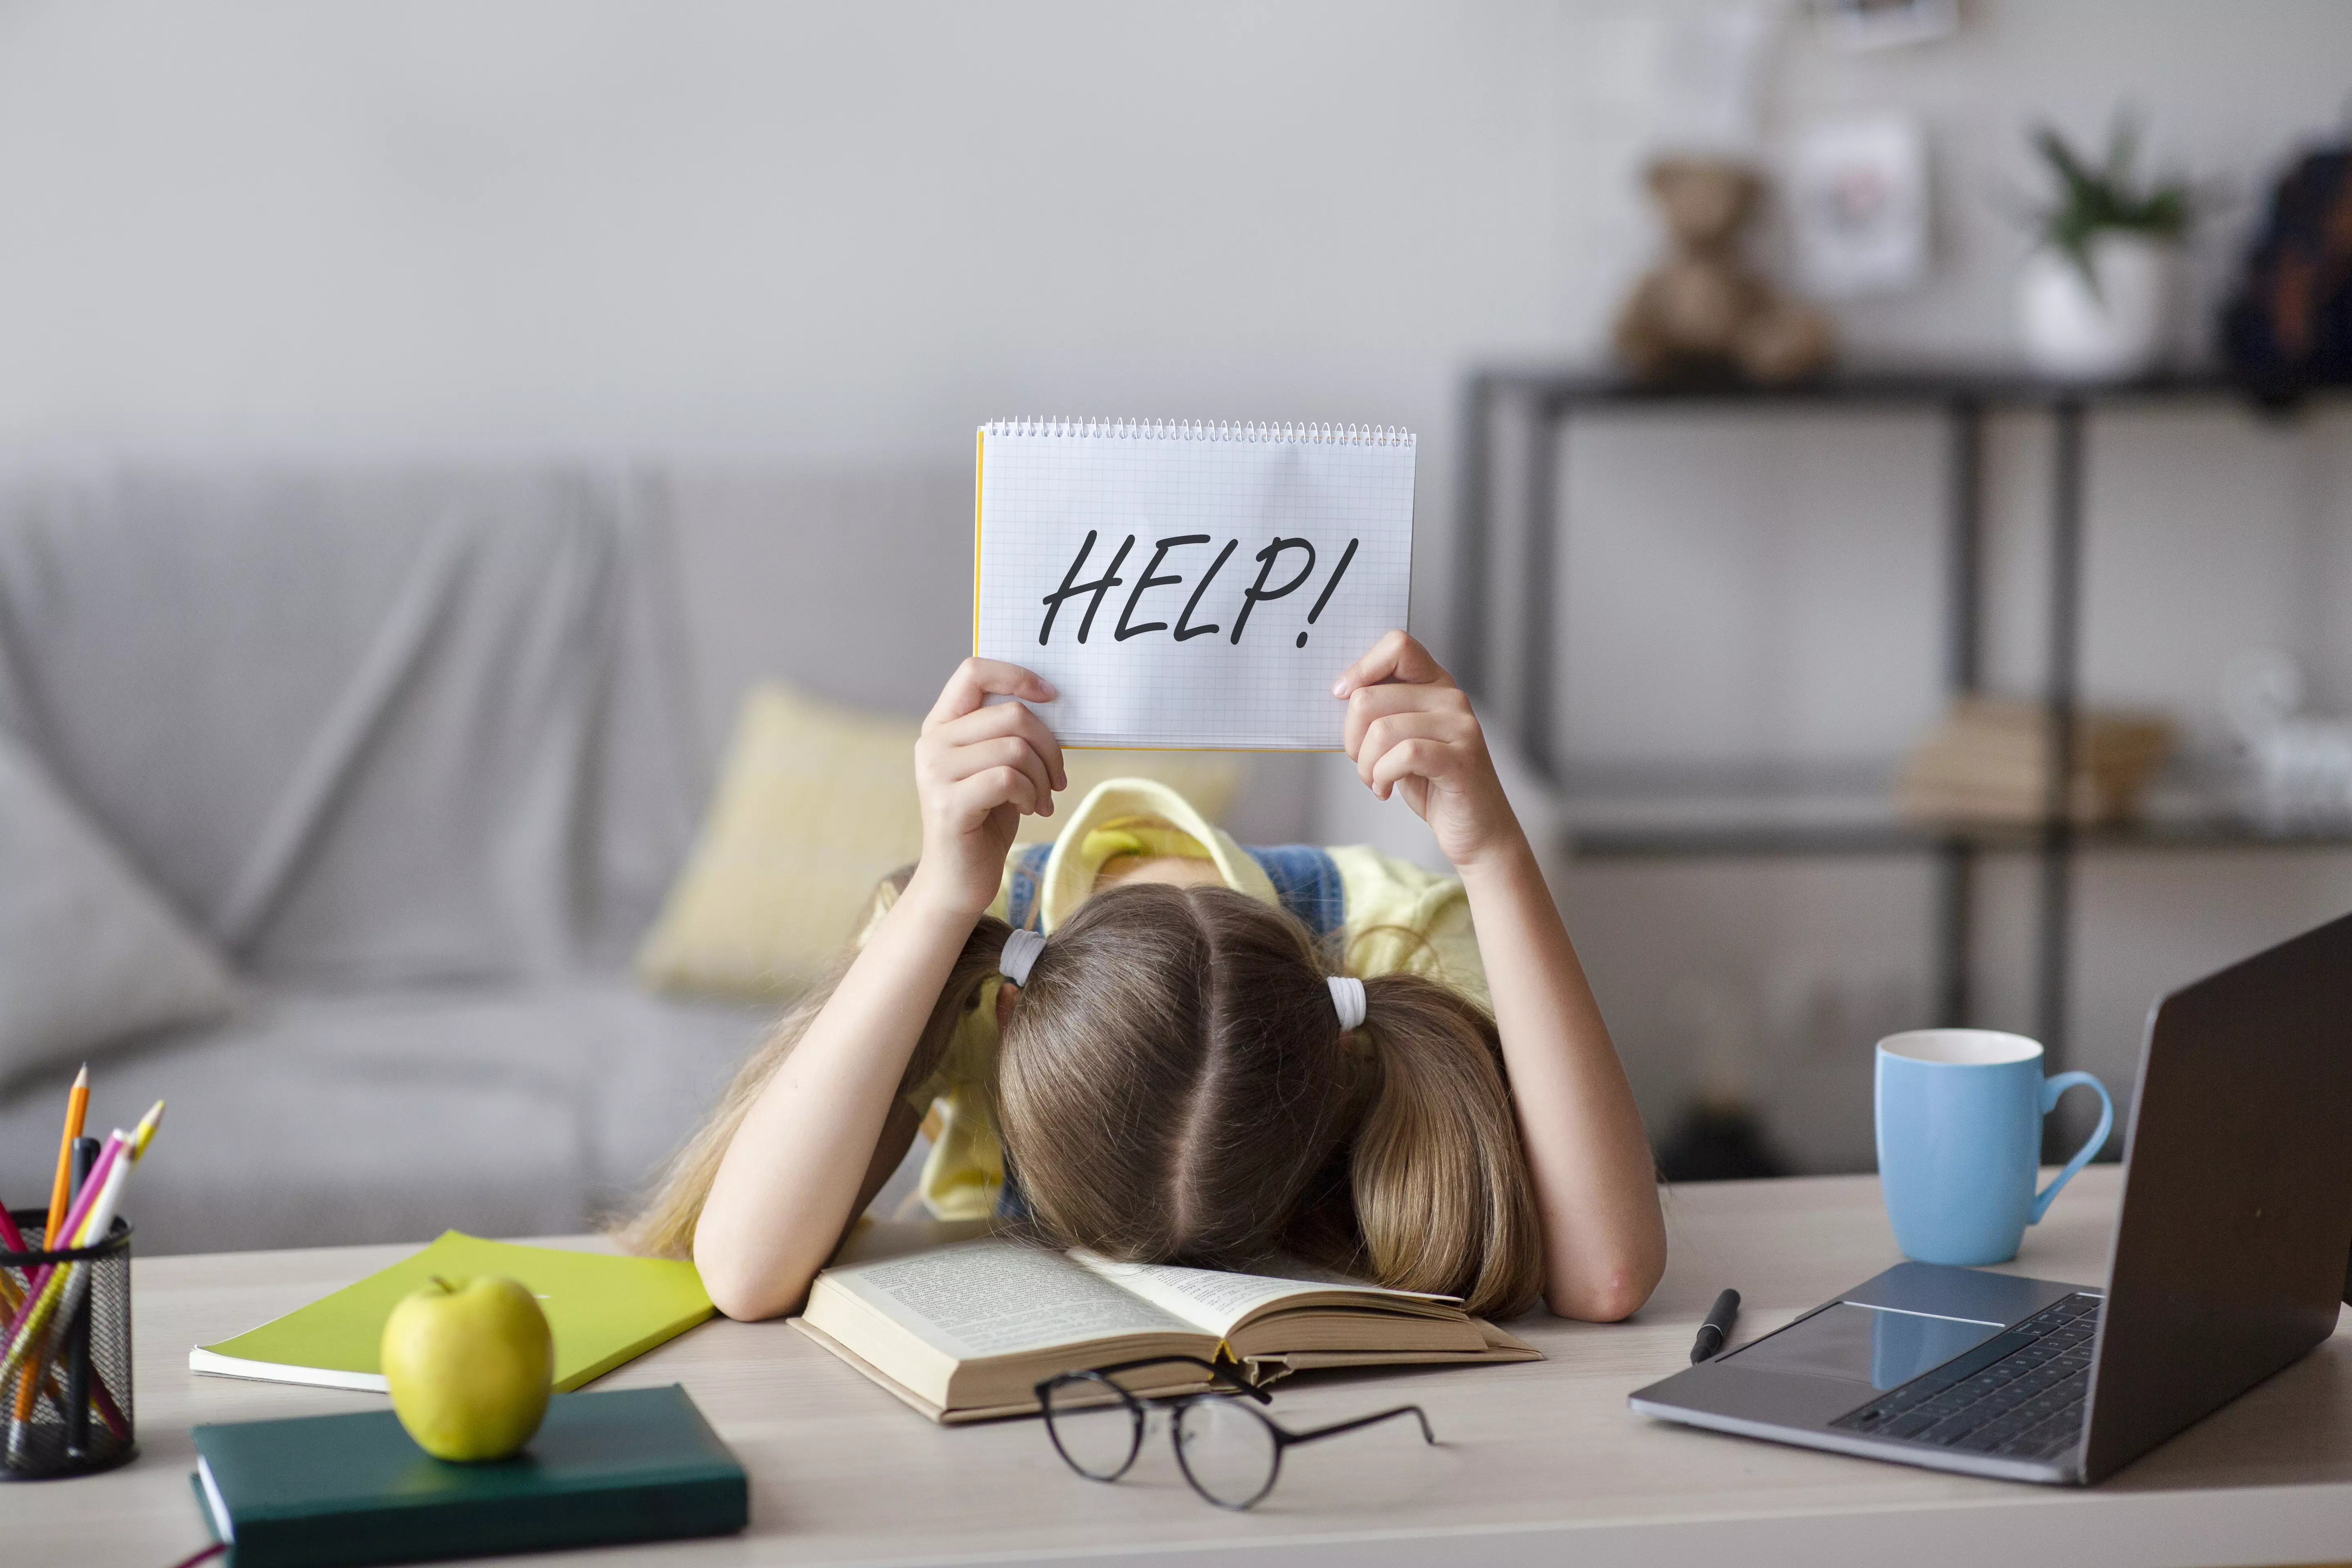 a frustrated girl with her head on the desk in front of her, holding up a help sign